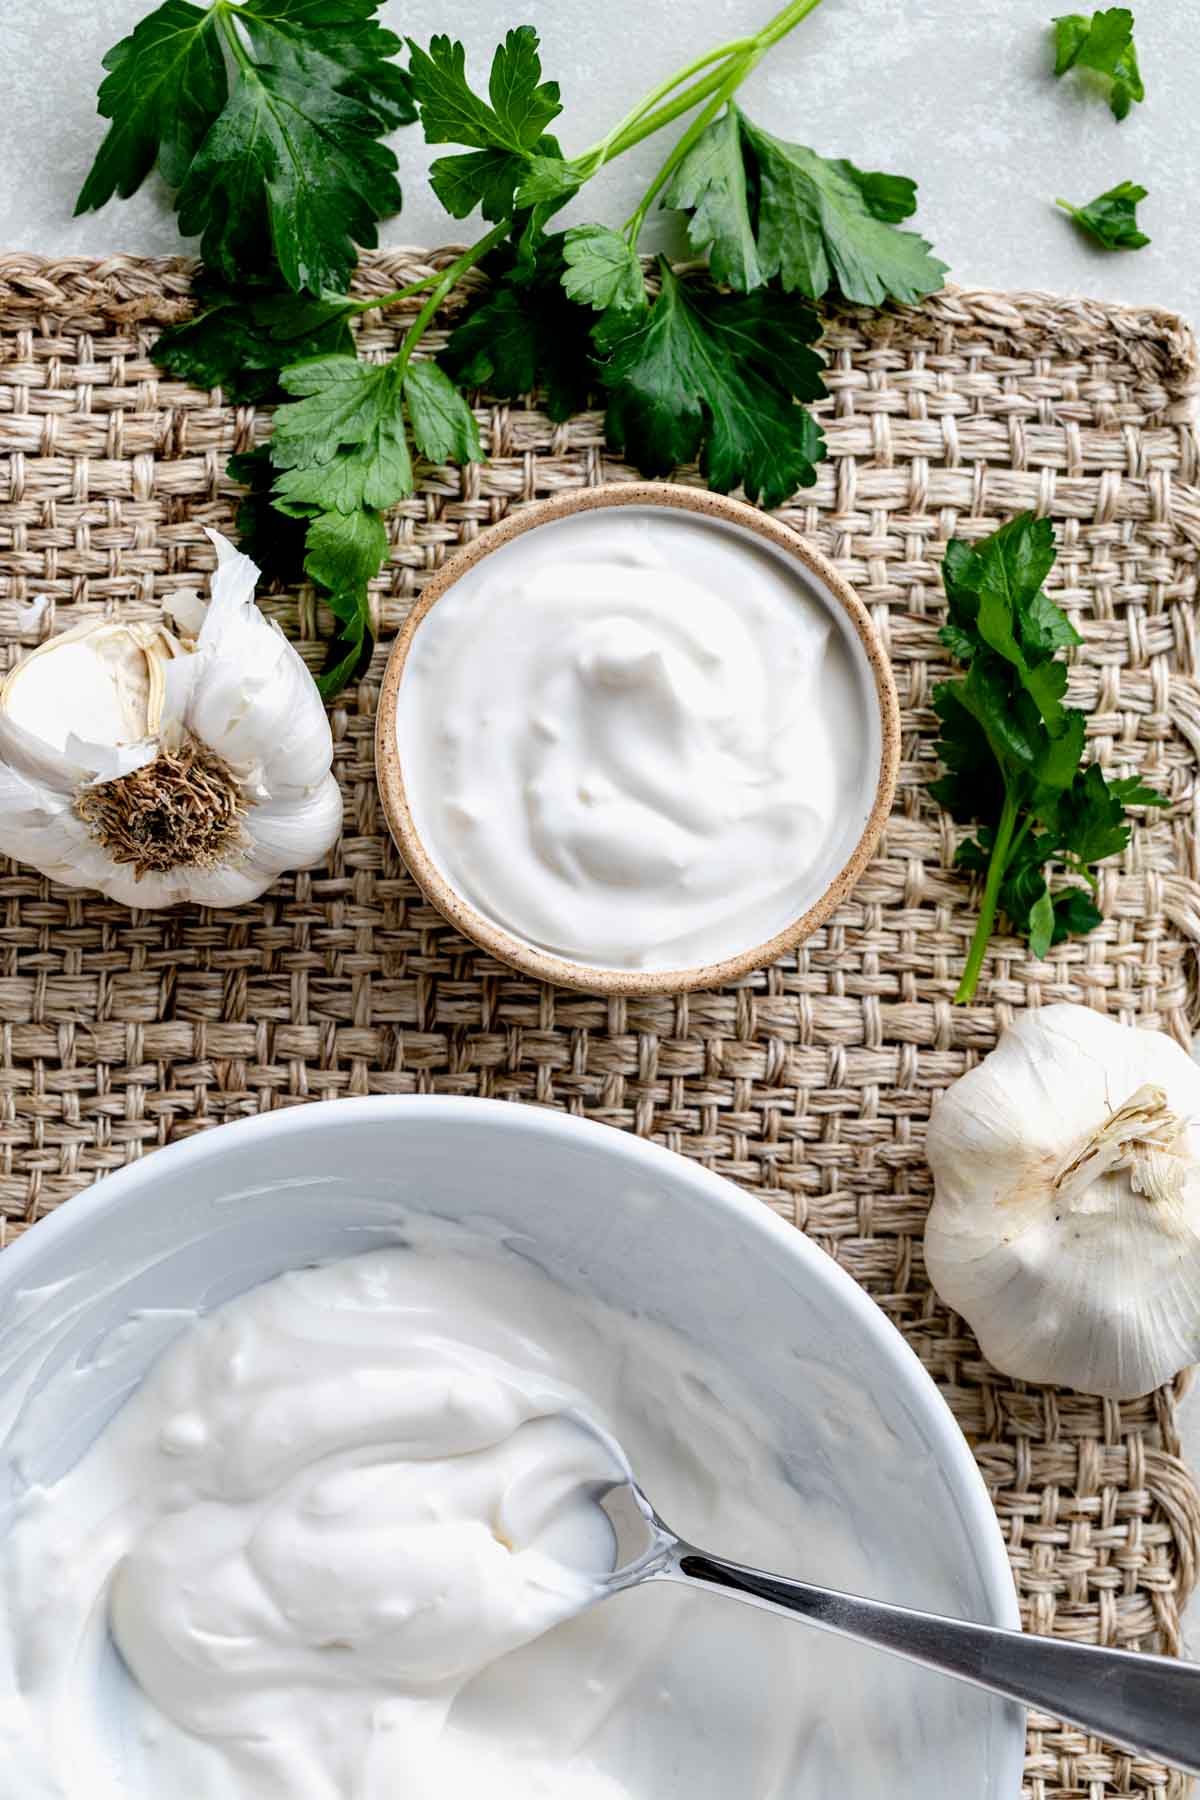 Greek yogurt aioli in a small serving bowl and the white mixing bowl